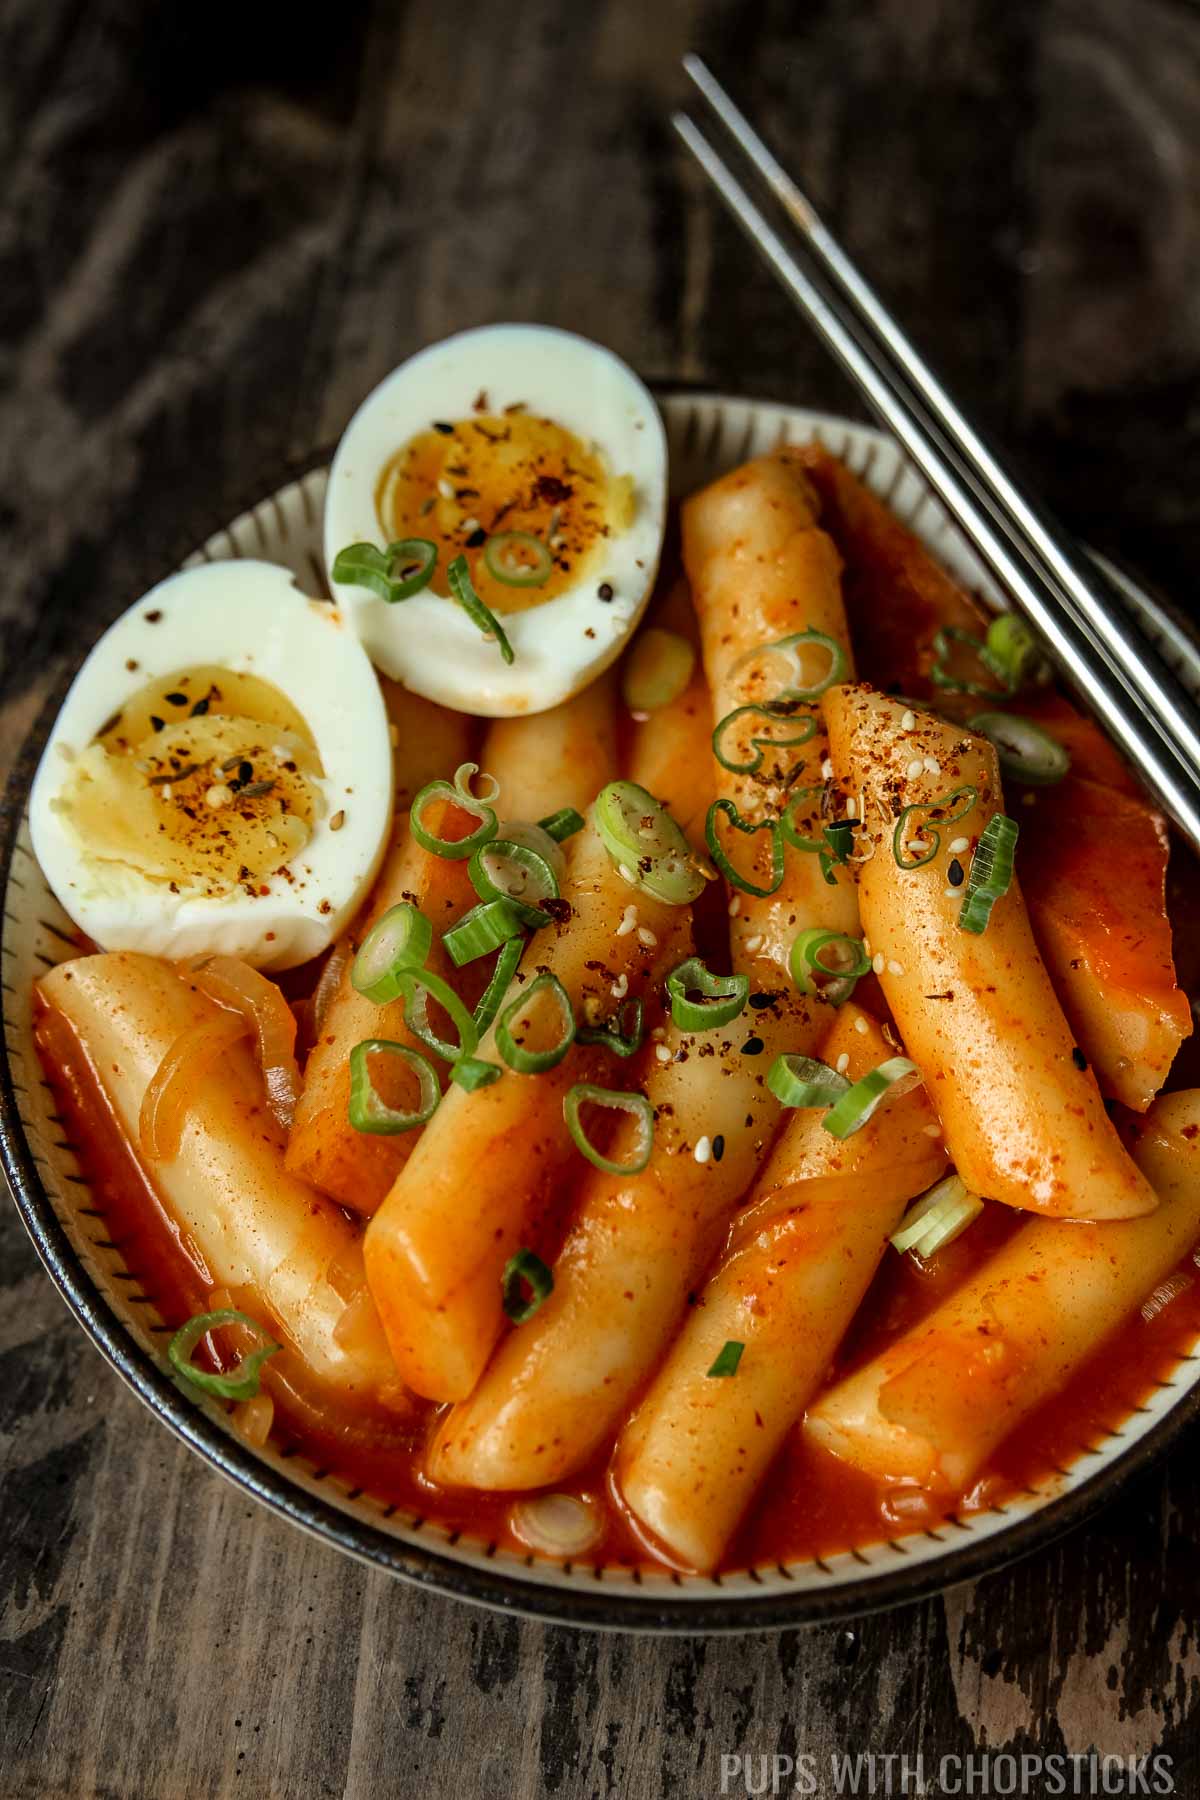 Closeup of tteokbokki with soft boiled eggs and metal chopsticks on a wooden table.